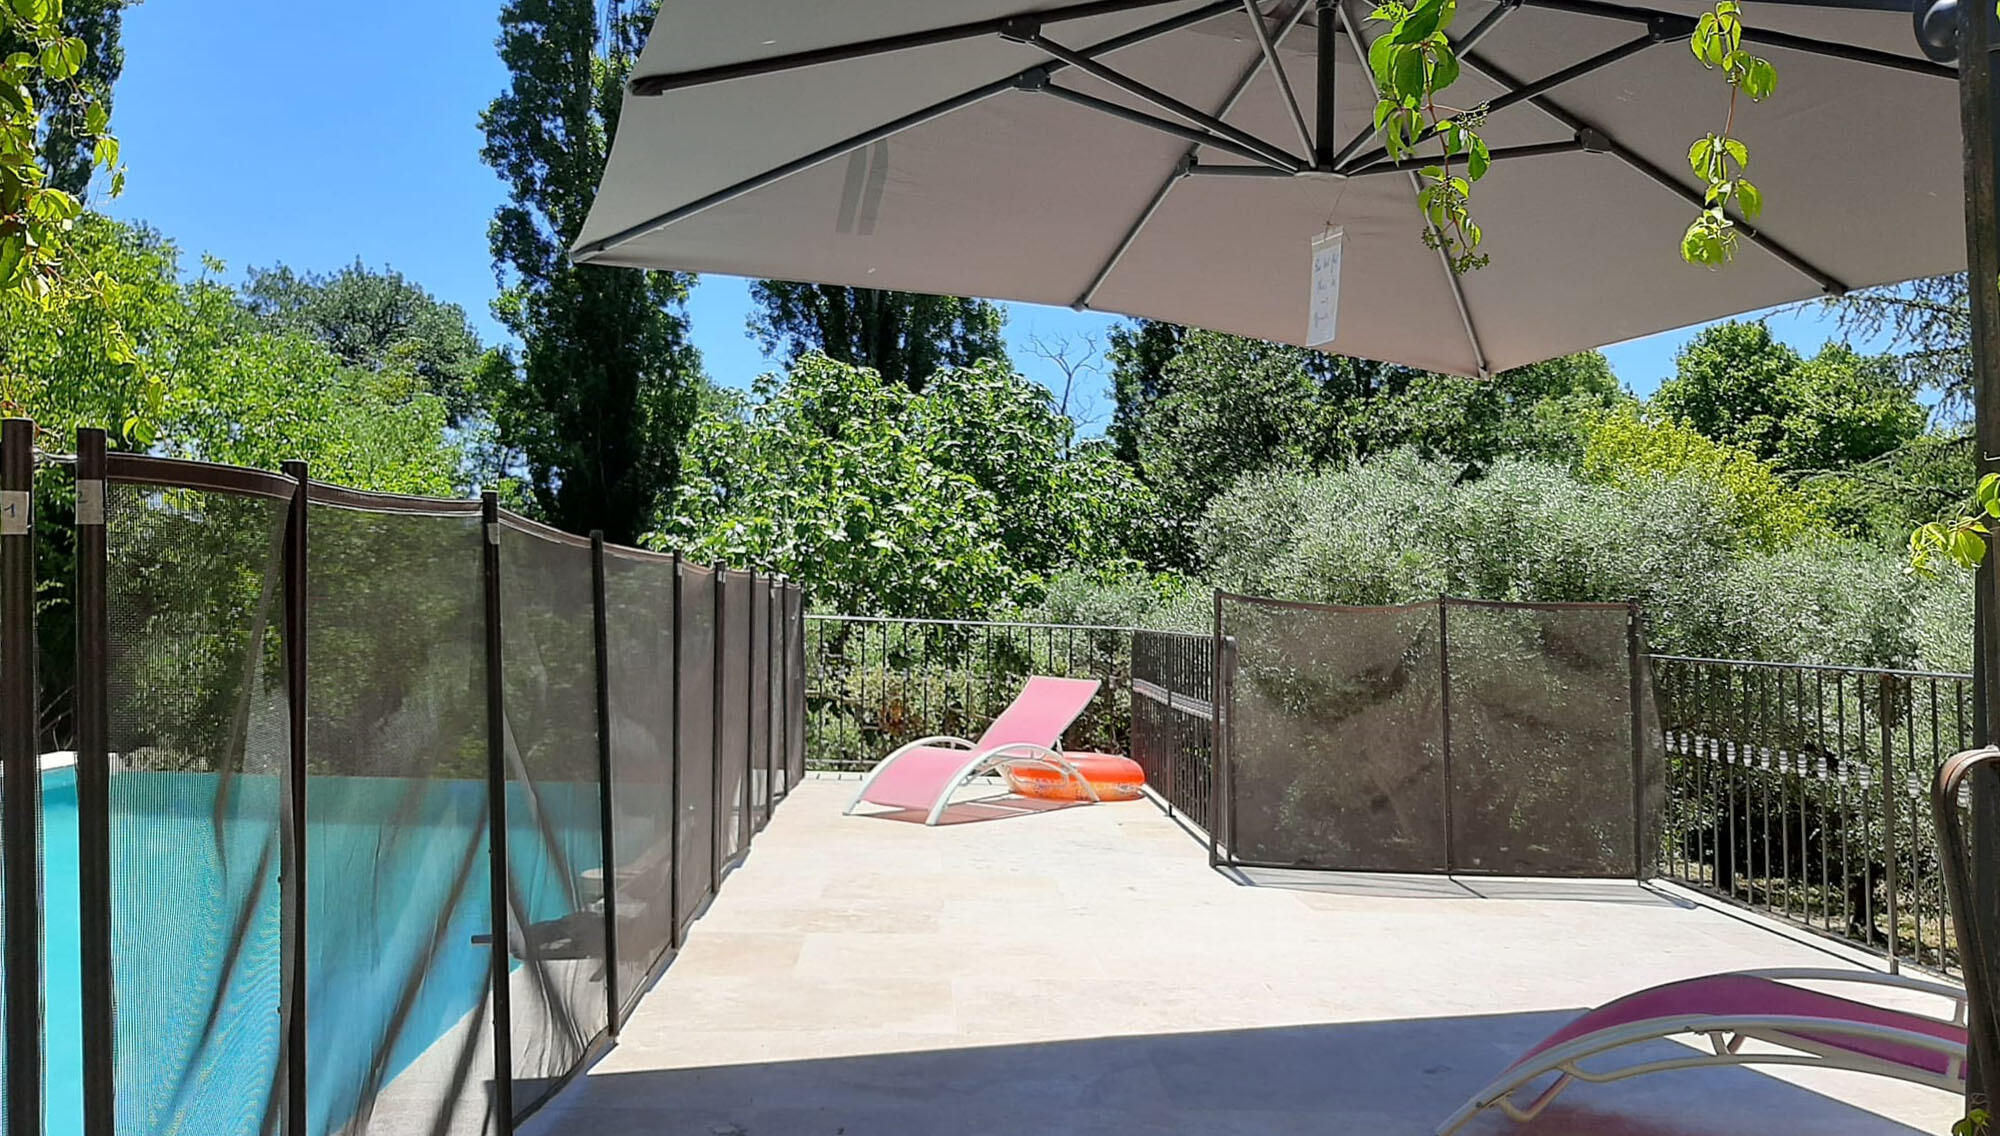 A removable pool fence